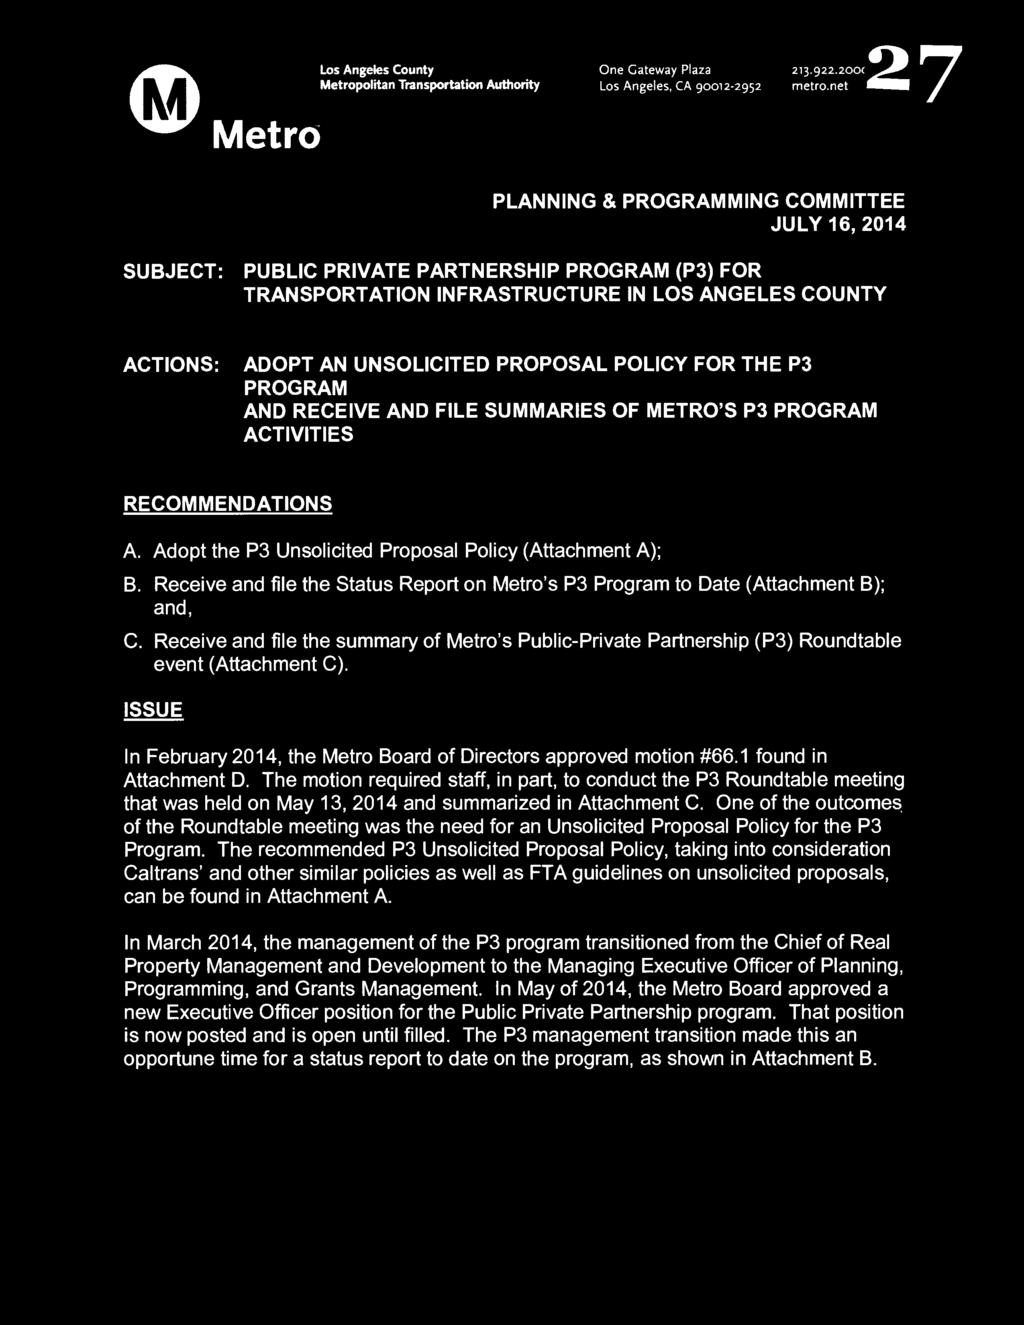 POLICY FOR THE P3 PROGRAM AND RECEIVE AND FILE SUMMARIES OF METRO'S P3 PROGRAM ACTIVITIES RECOMMENDATIONS A. Adopt the P3 Unsolicited Proposal Policy (Attachment A); B.